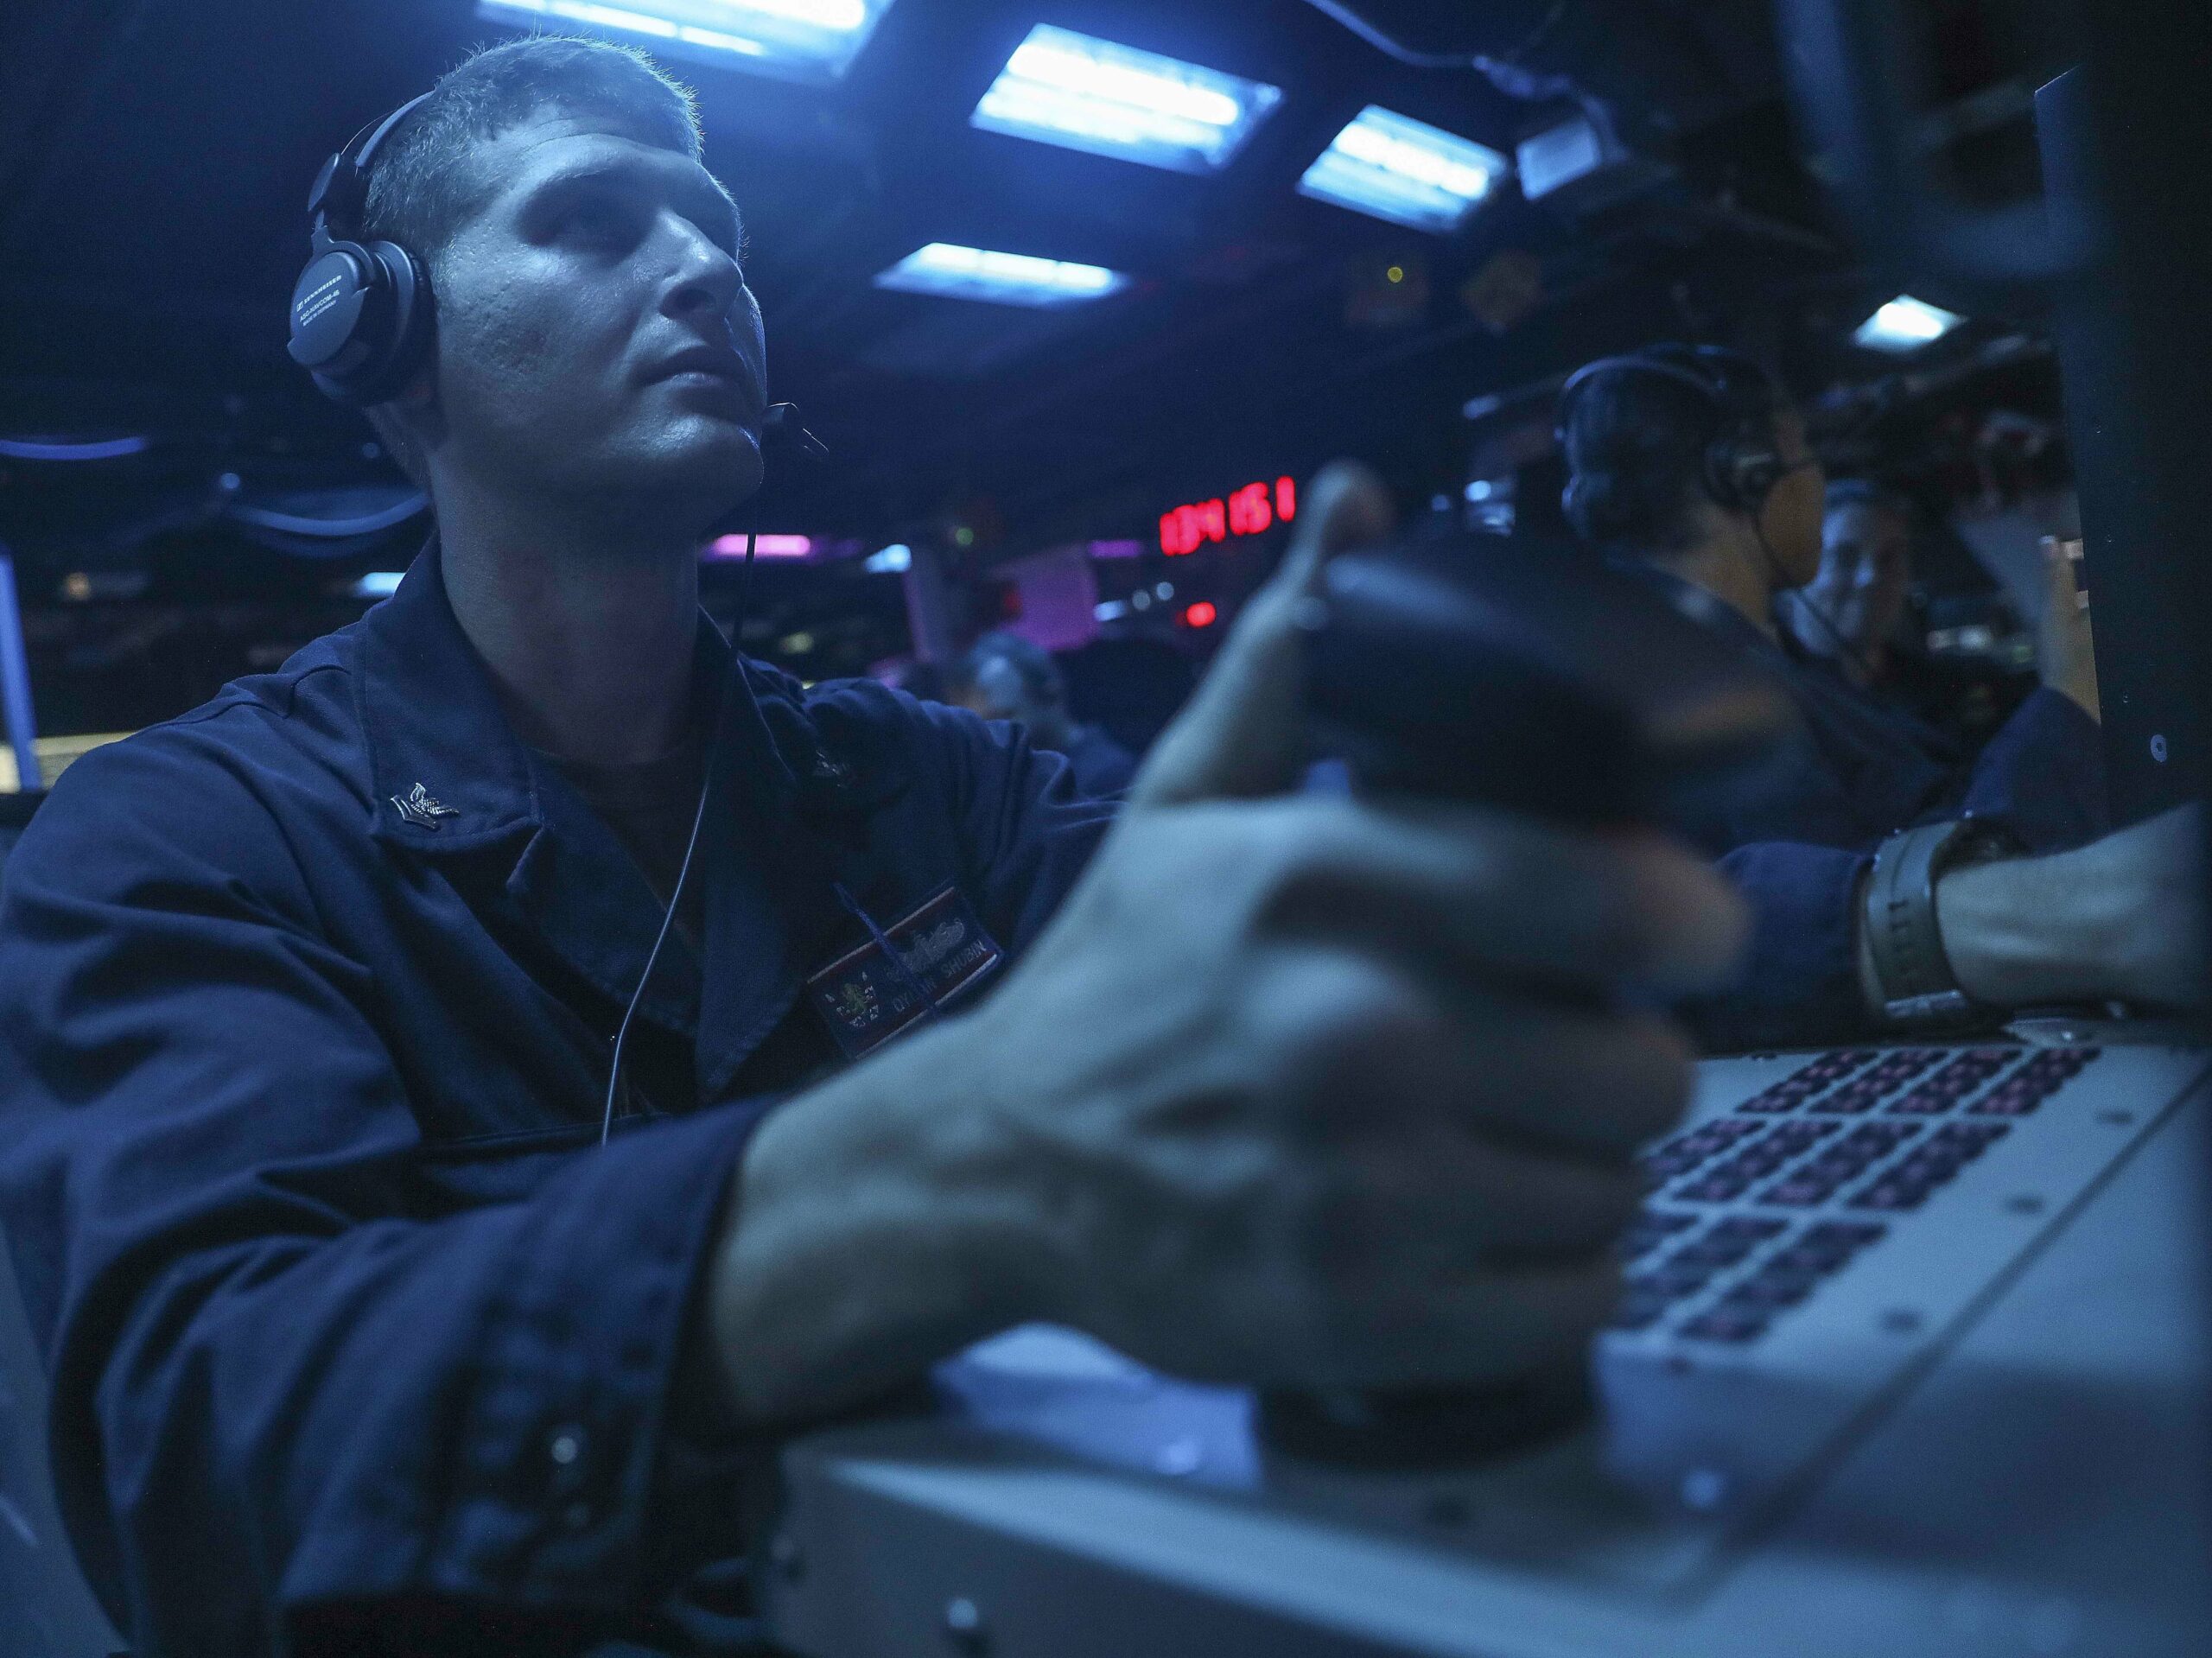 220828-N-UA460-1019 PHILIPPINE SEA (Aug. 28, 2022) – Fire Controlman 2nd Class Dylan Shubin, from Norco, California, mans a console in the combat information center aboard Arleigh Burke-class guided-missile destroyer USS Barry (DDG 52) during live-fire missile exercise as part of Pacific Vanguard (PV) 2022 while operating in the Philippine Sea, Aug. 28. PV22 is an exercise with a focus on interoperability and the advanced training and integration of allied maritime forces. (U.S. Navy photo by Mass Communication Specialist 1st Class Greg Johnson)